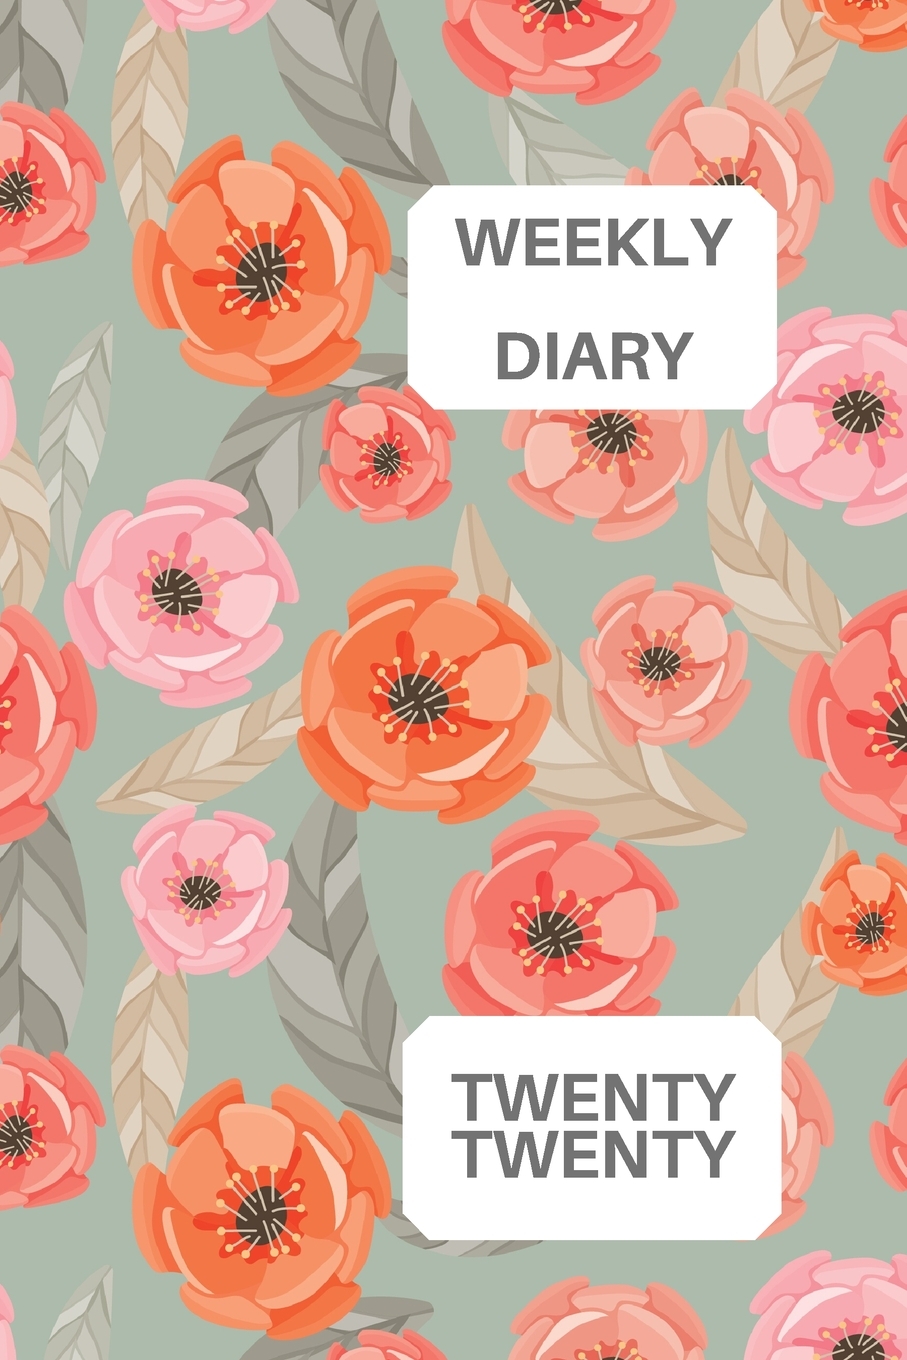 Weekly Diary Twenty Twenty: 6x9 week to a page 2020 diary planner. 12 months monthly planner, weekly diary & lined paper note pages. Perfect for teachers, students and small business owners. Poppy des - image 1 of 1